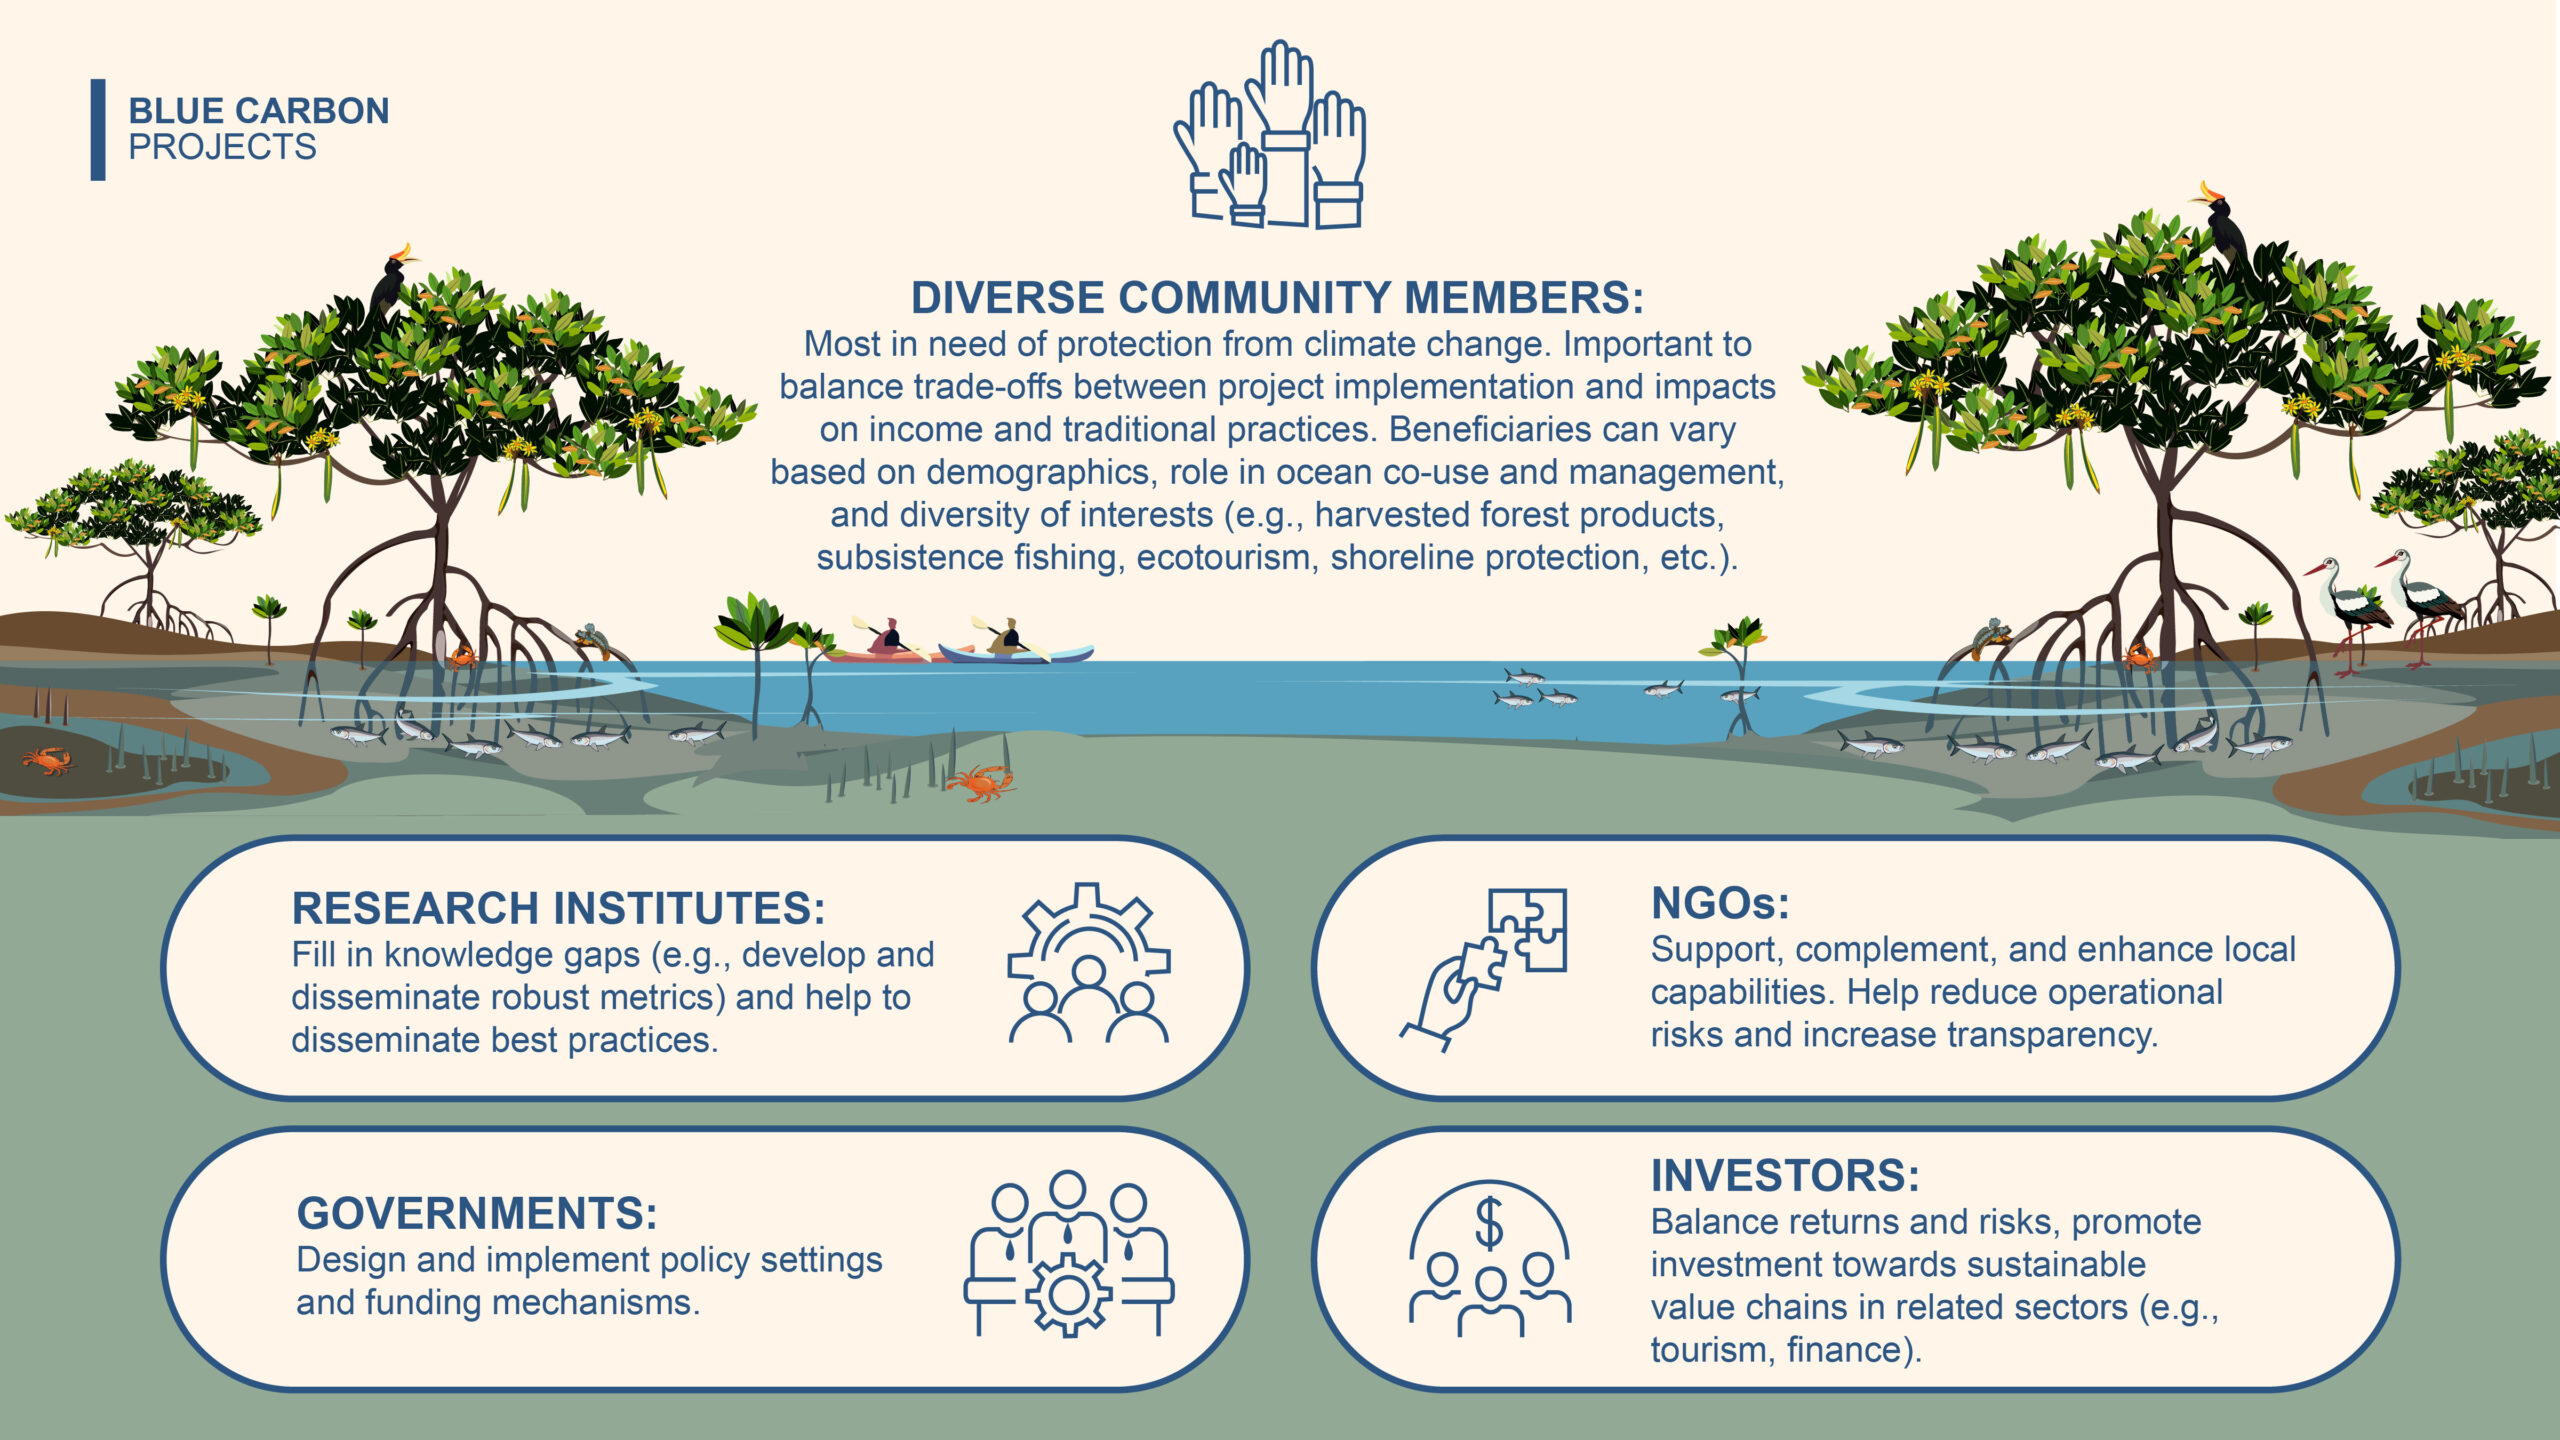 Key actors and their roles in implementing blue carbon projects in estuarine and coastal ecosystems, with a focus on communities as beneficiaries